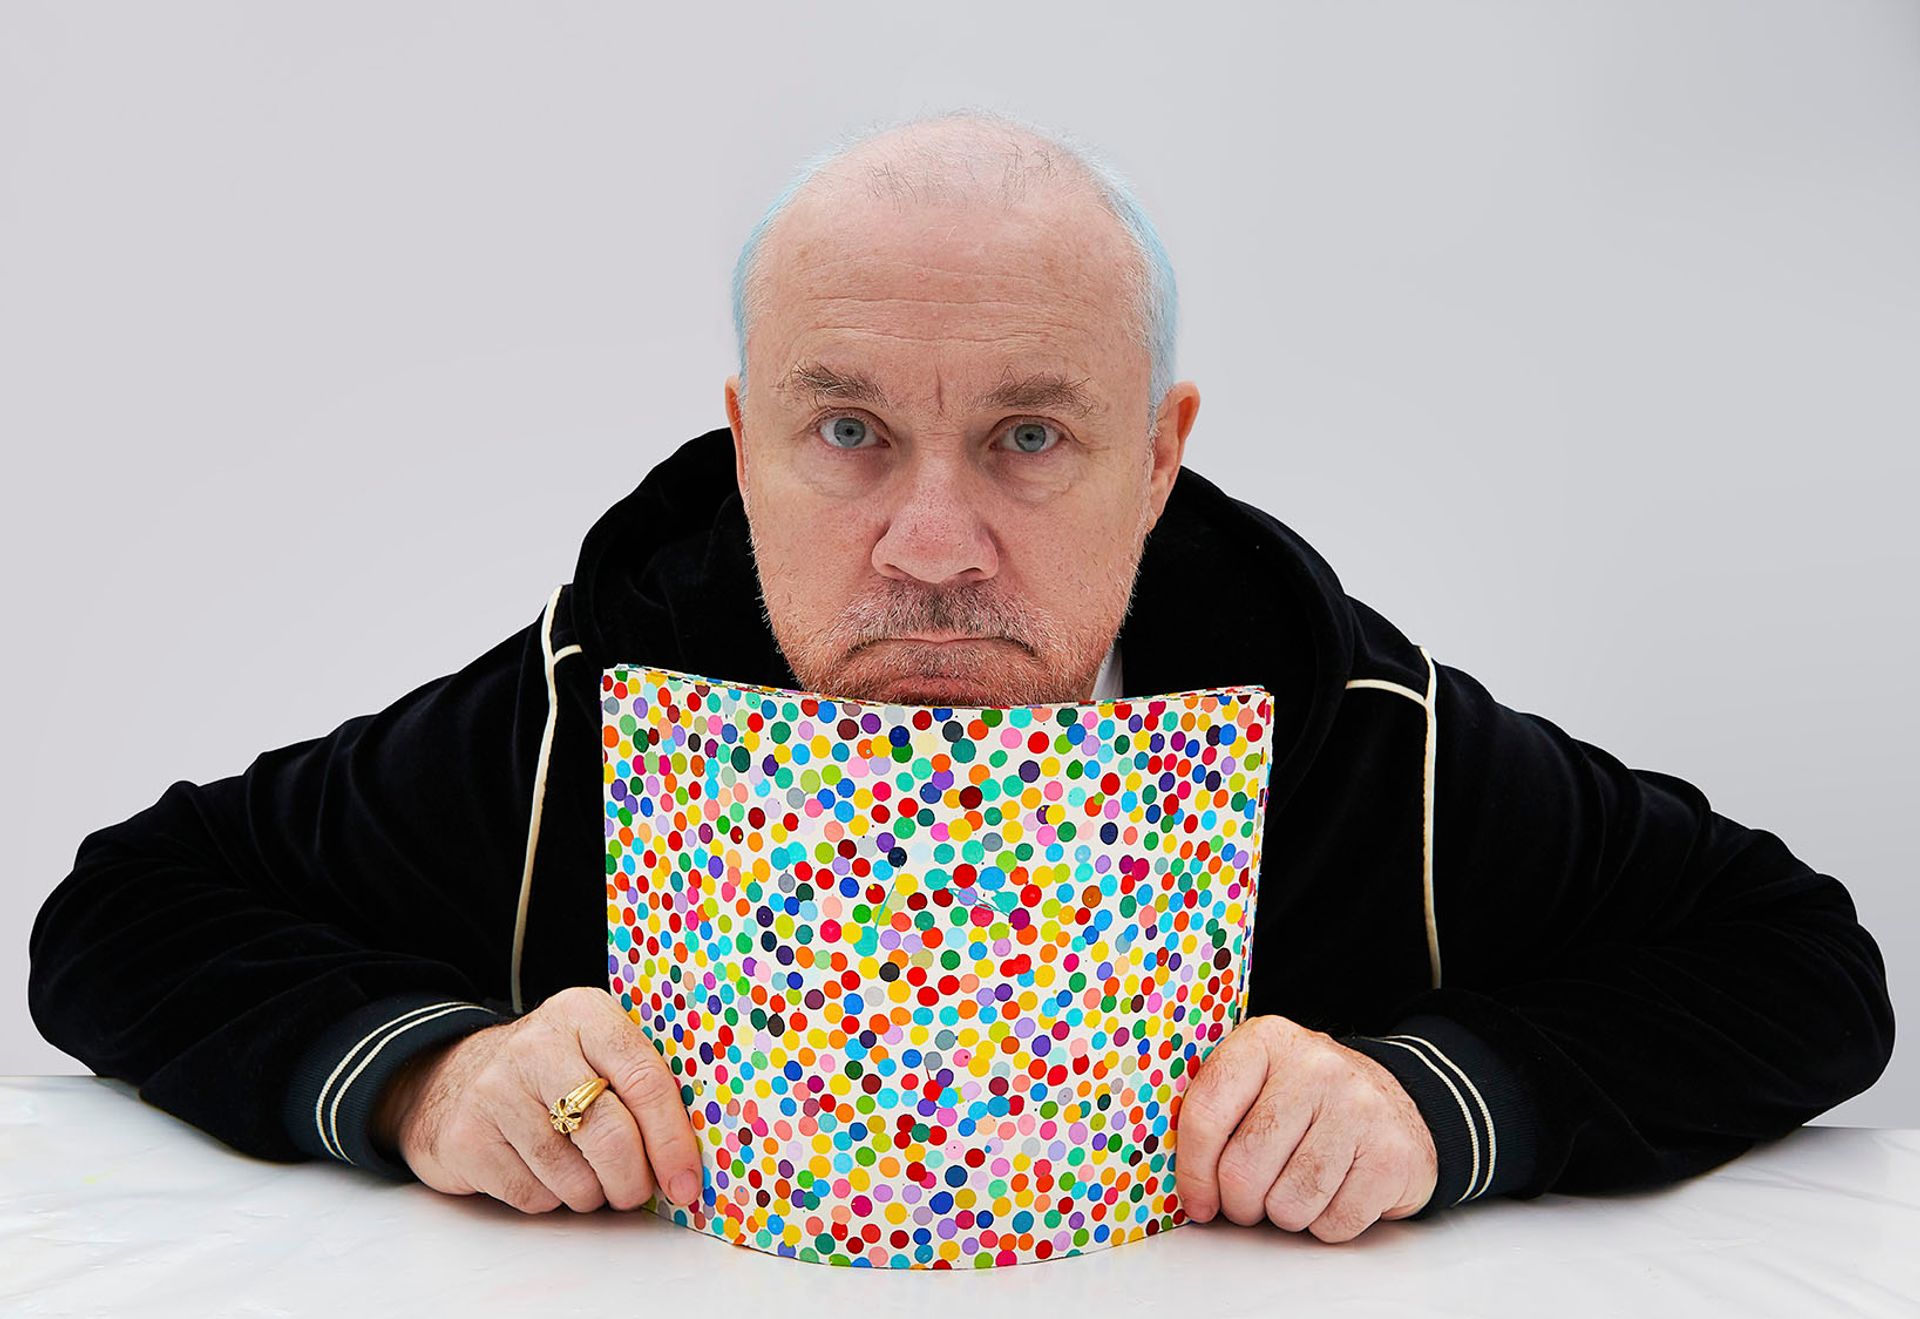 Damien Hirst with The Currency artworks in 2021. 

Photo: Prudence Cuming Associates Ltd. Courtesy of Damien Hirst and Science Ltd. All rights reserved, DACS 2022. 